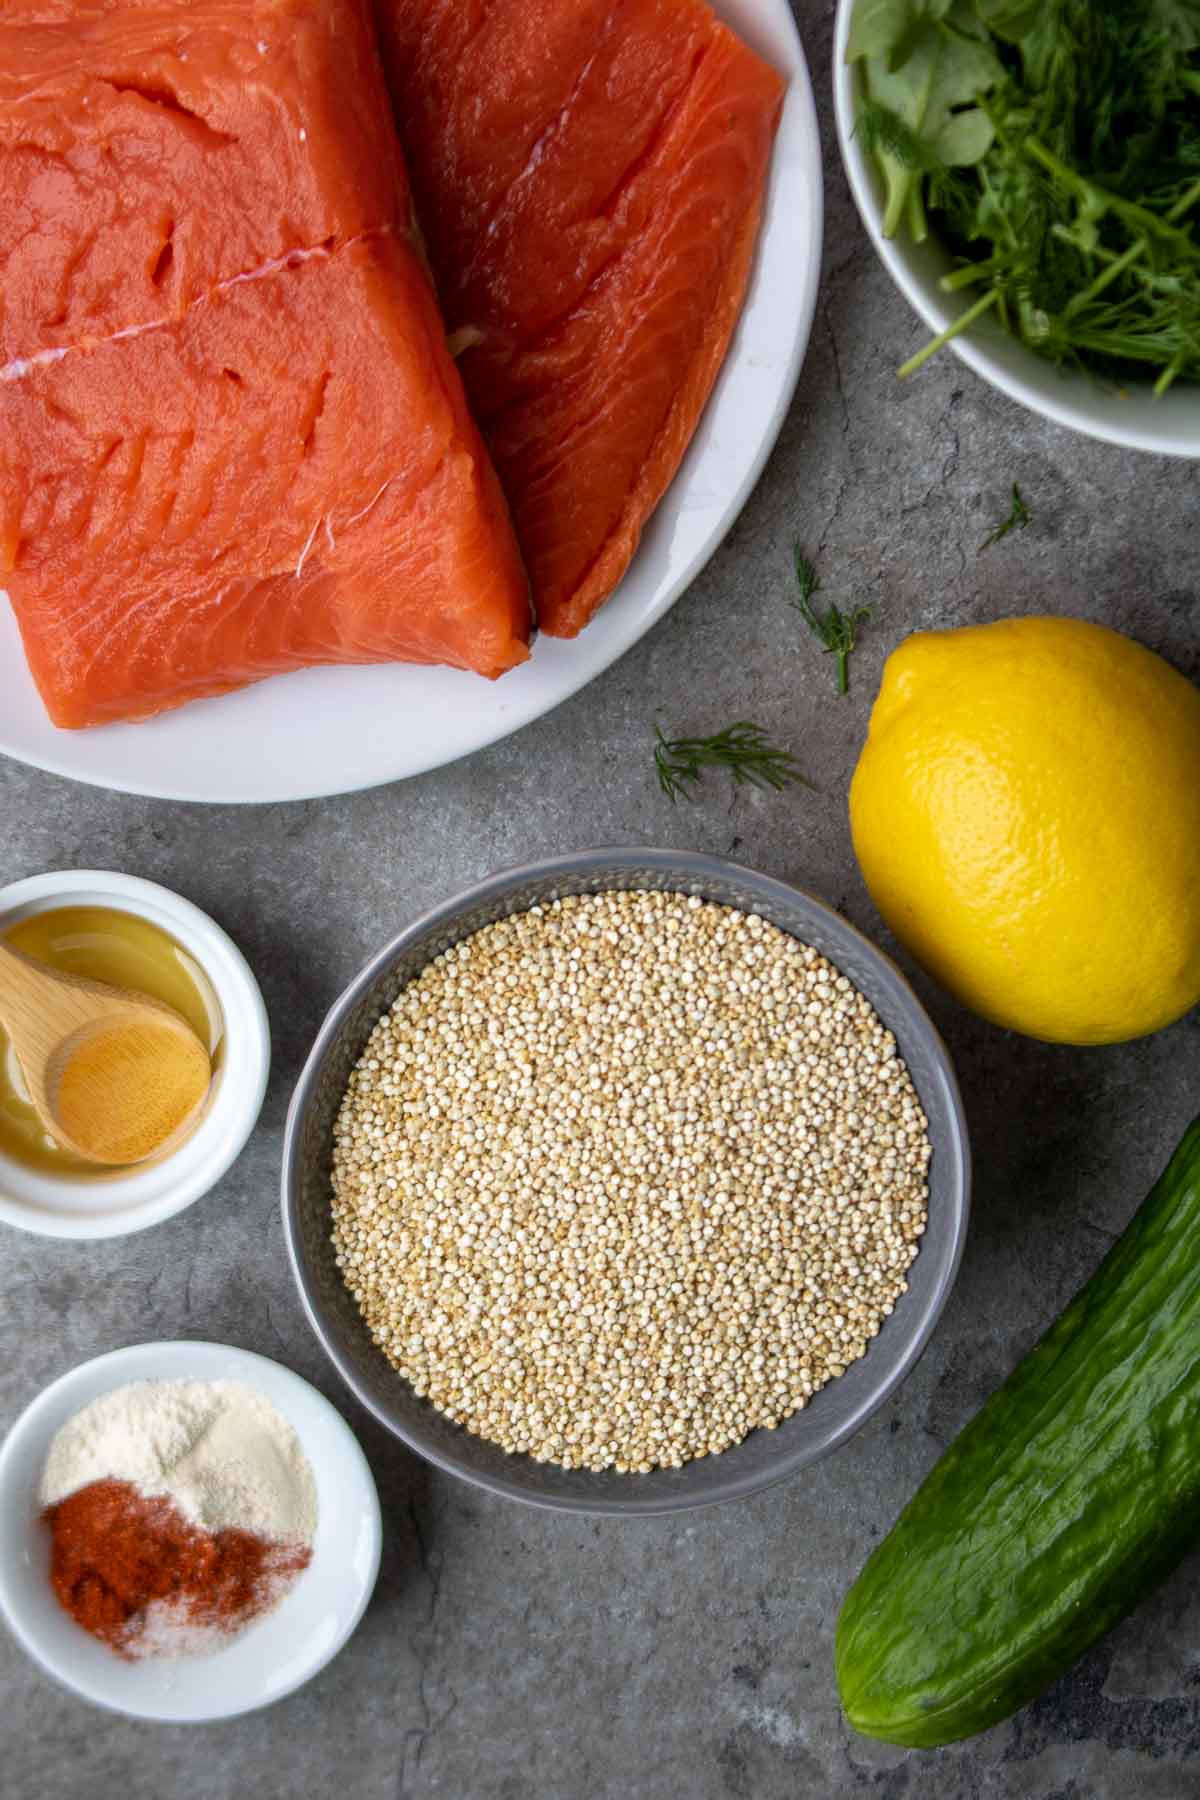 Ingredients for salmon and quinoa bowls, including salmon fillets, quinoa, cucumber, arugula, dill, lemon, and spices.